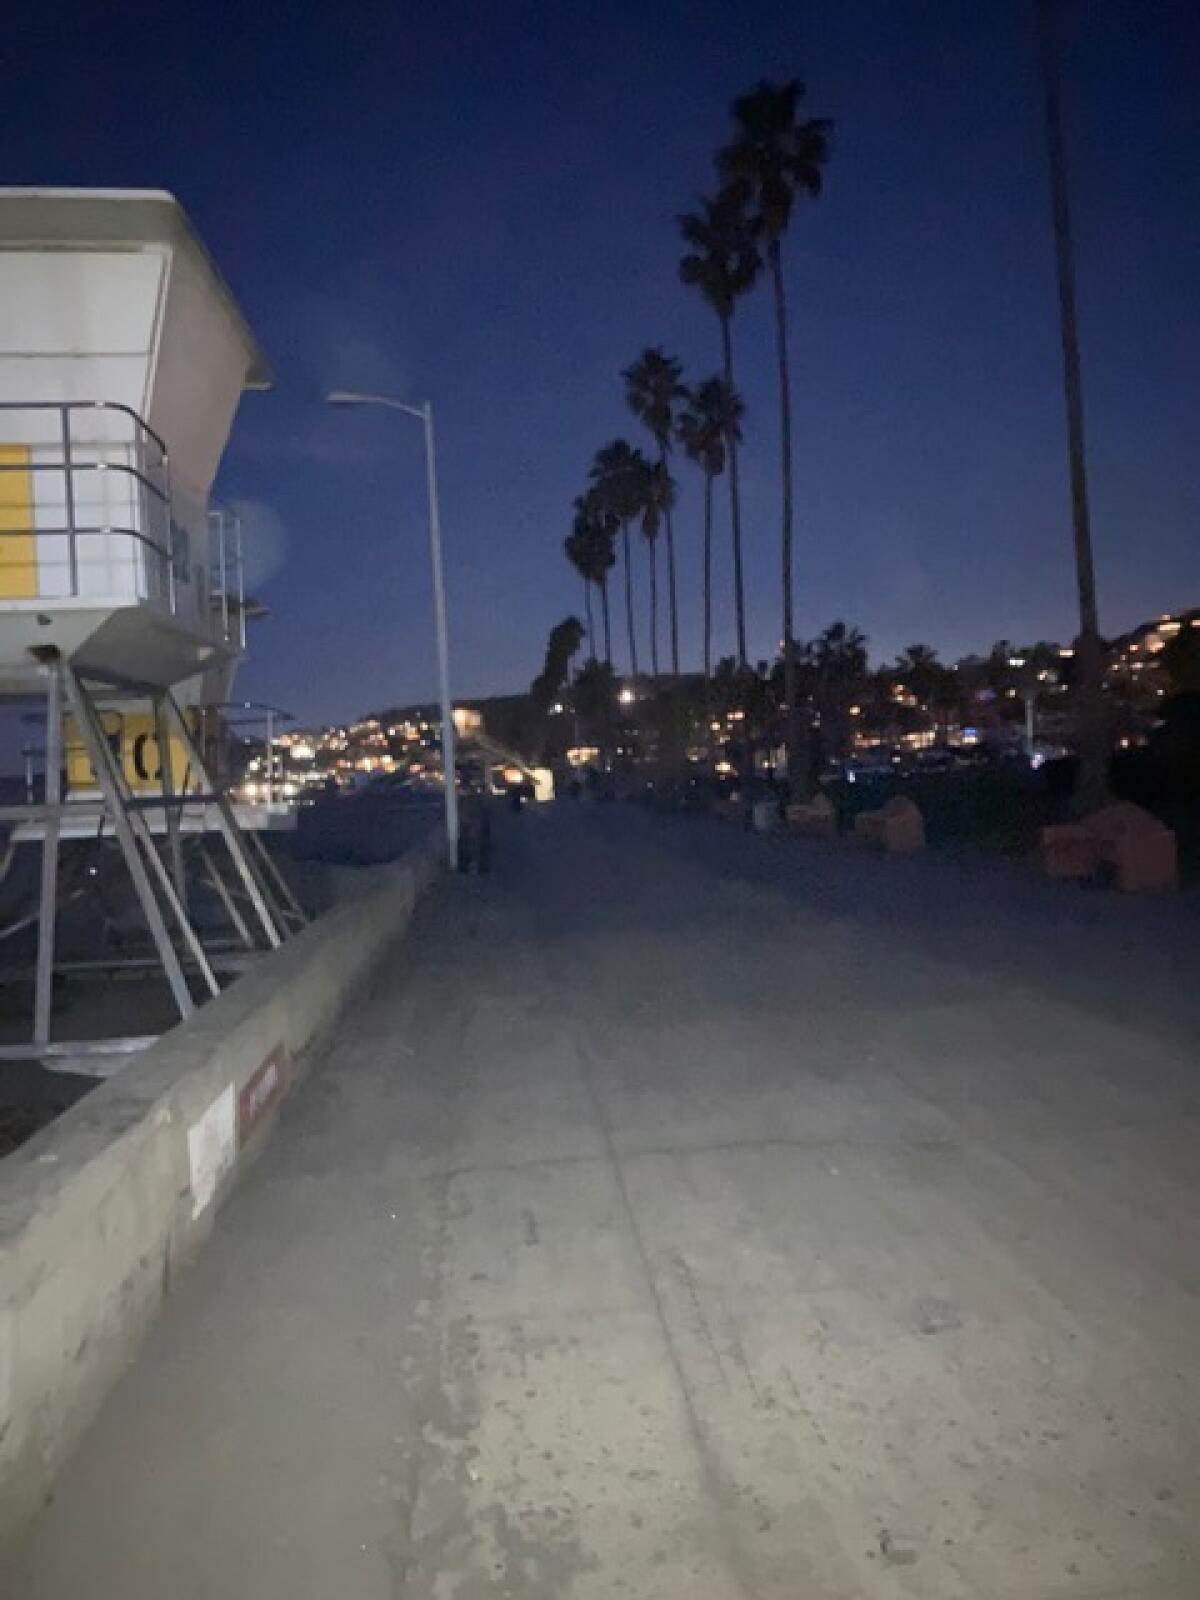 All the streetlights along the boardwalk at La Jolla Shores were out in this photo from January 2022.